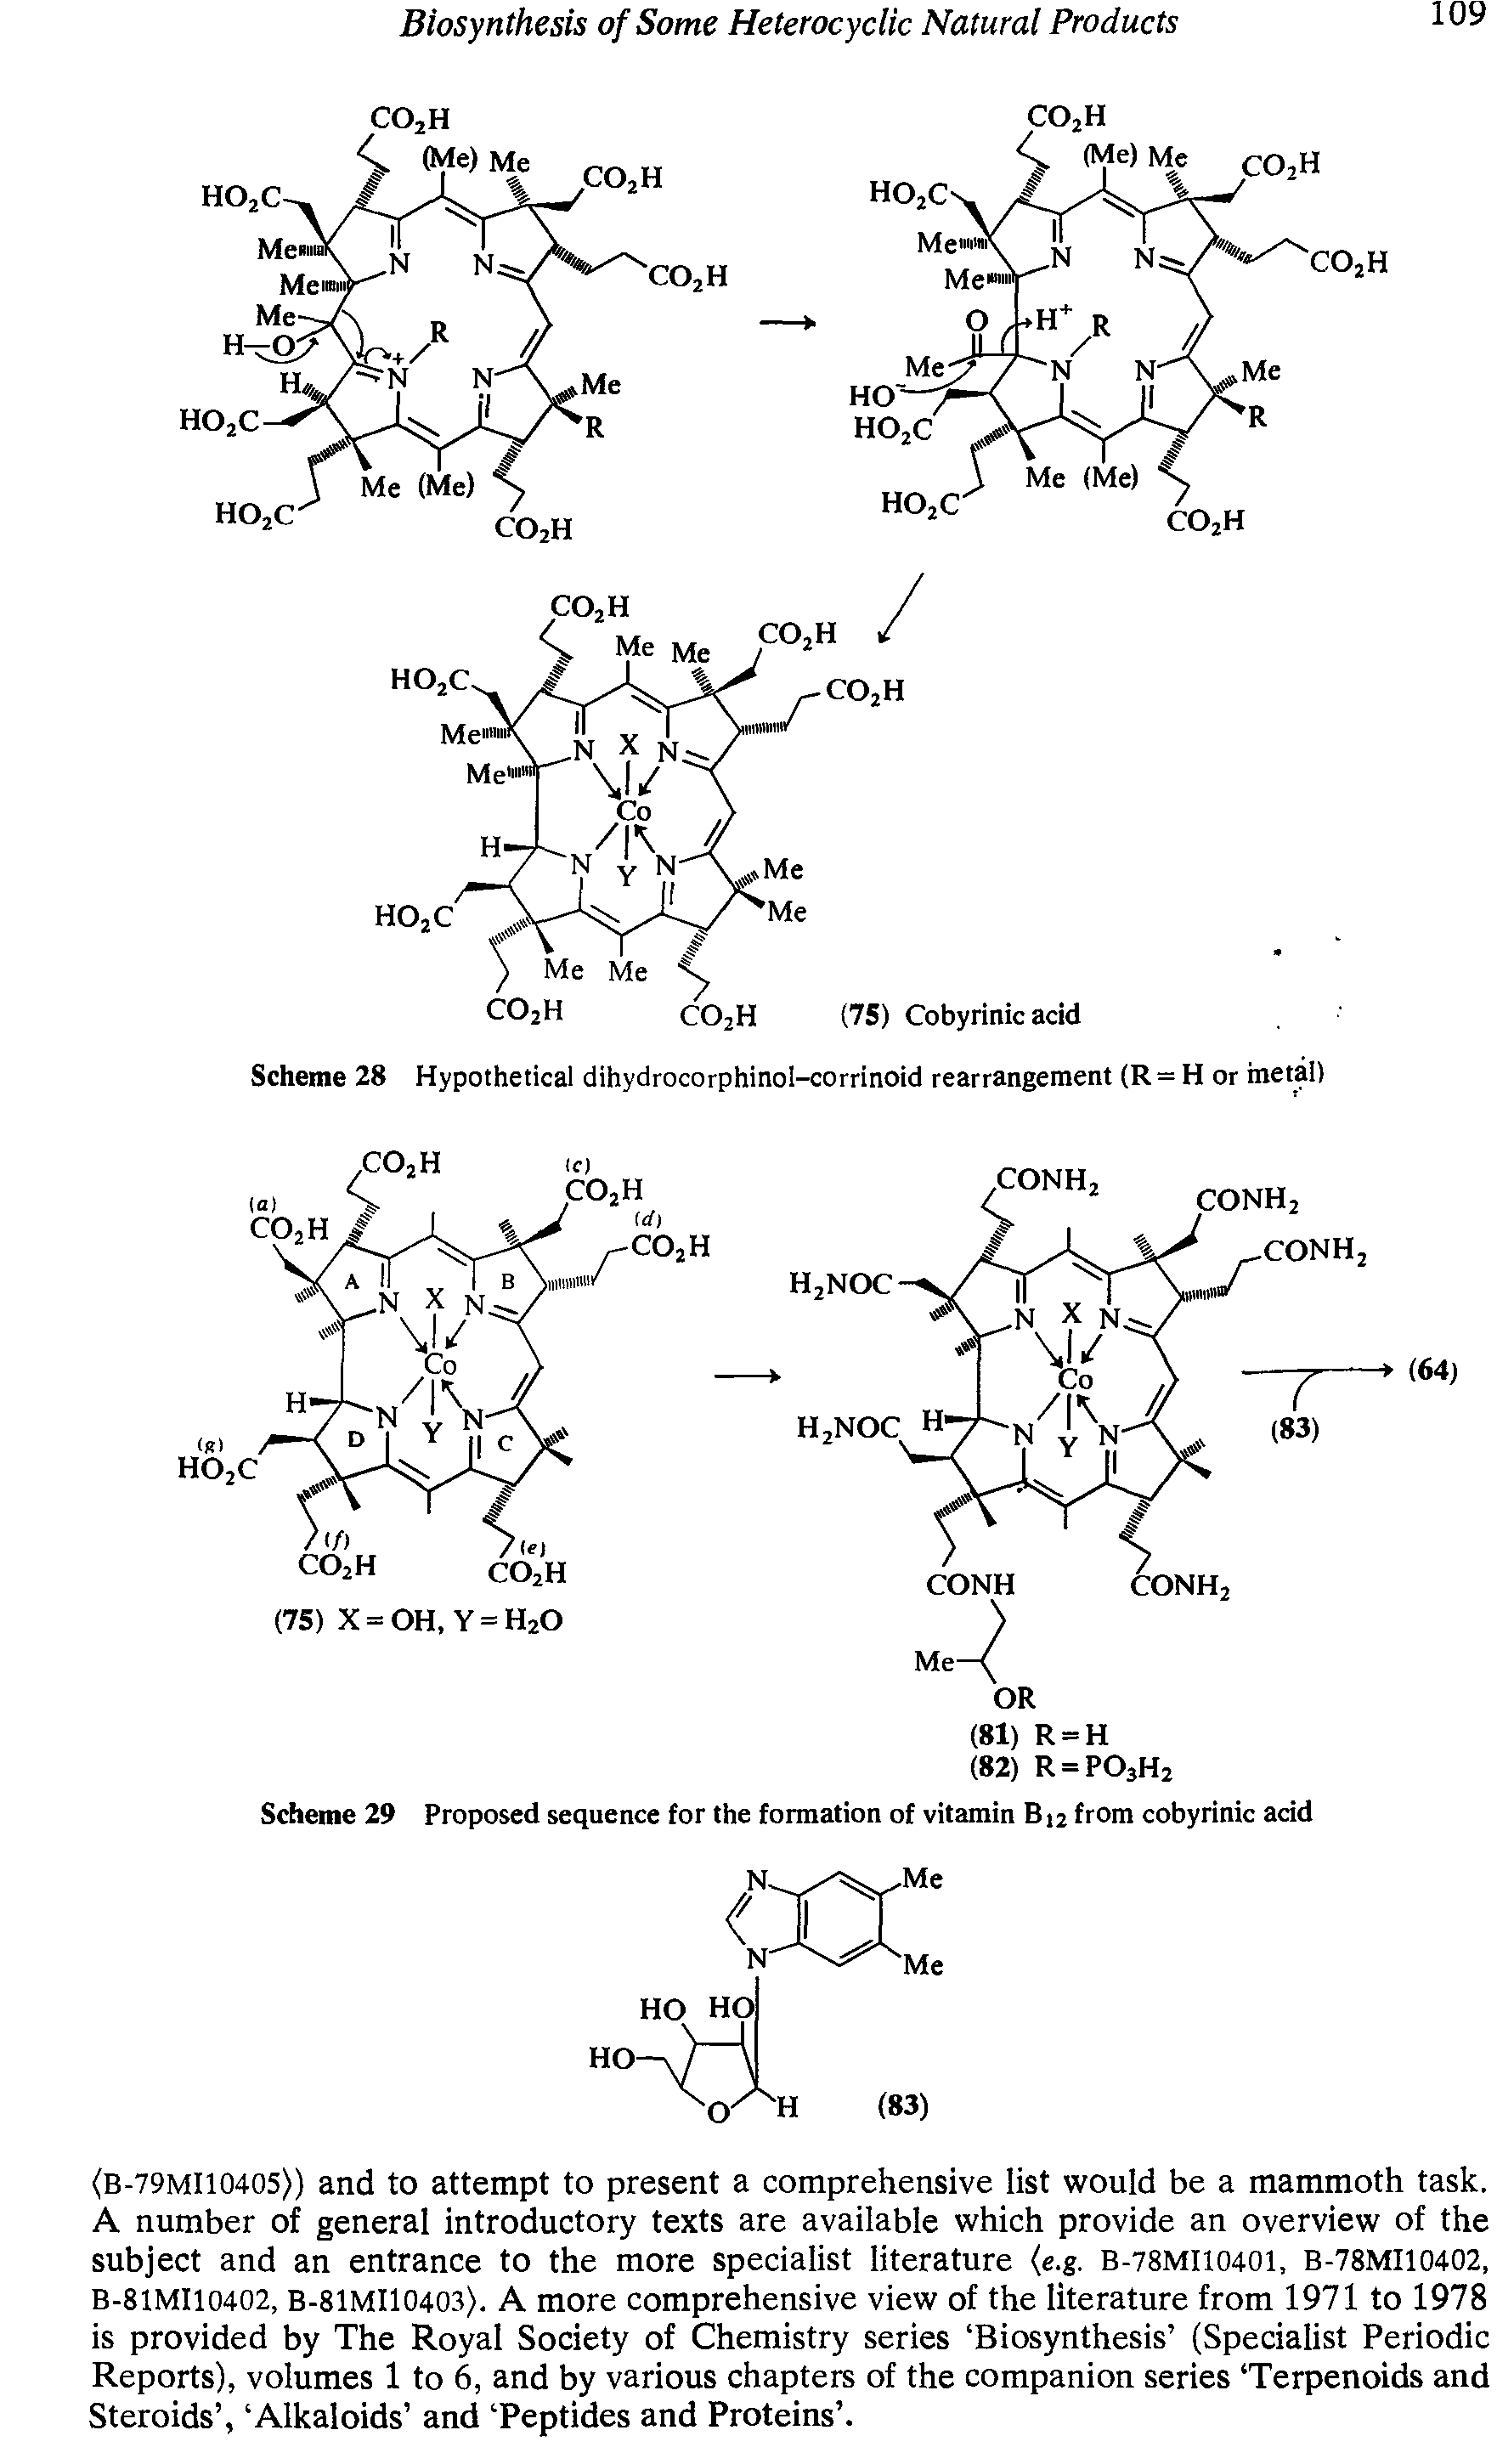 Scheme 29 Proposed sequence for the formation of vitamin Bj2 from cobyrinic acid...